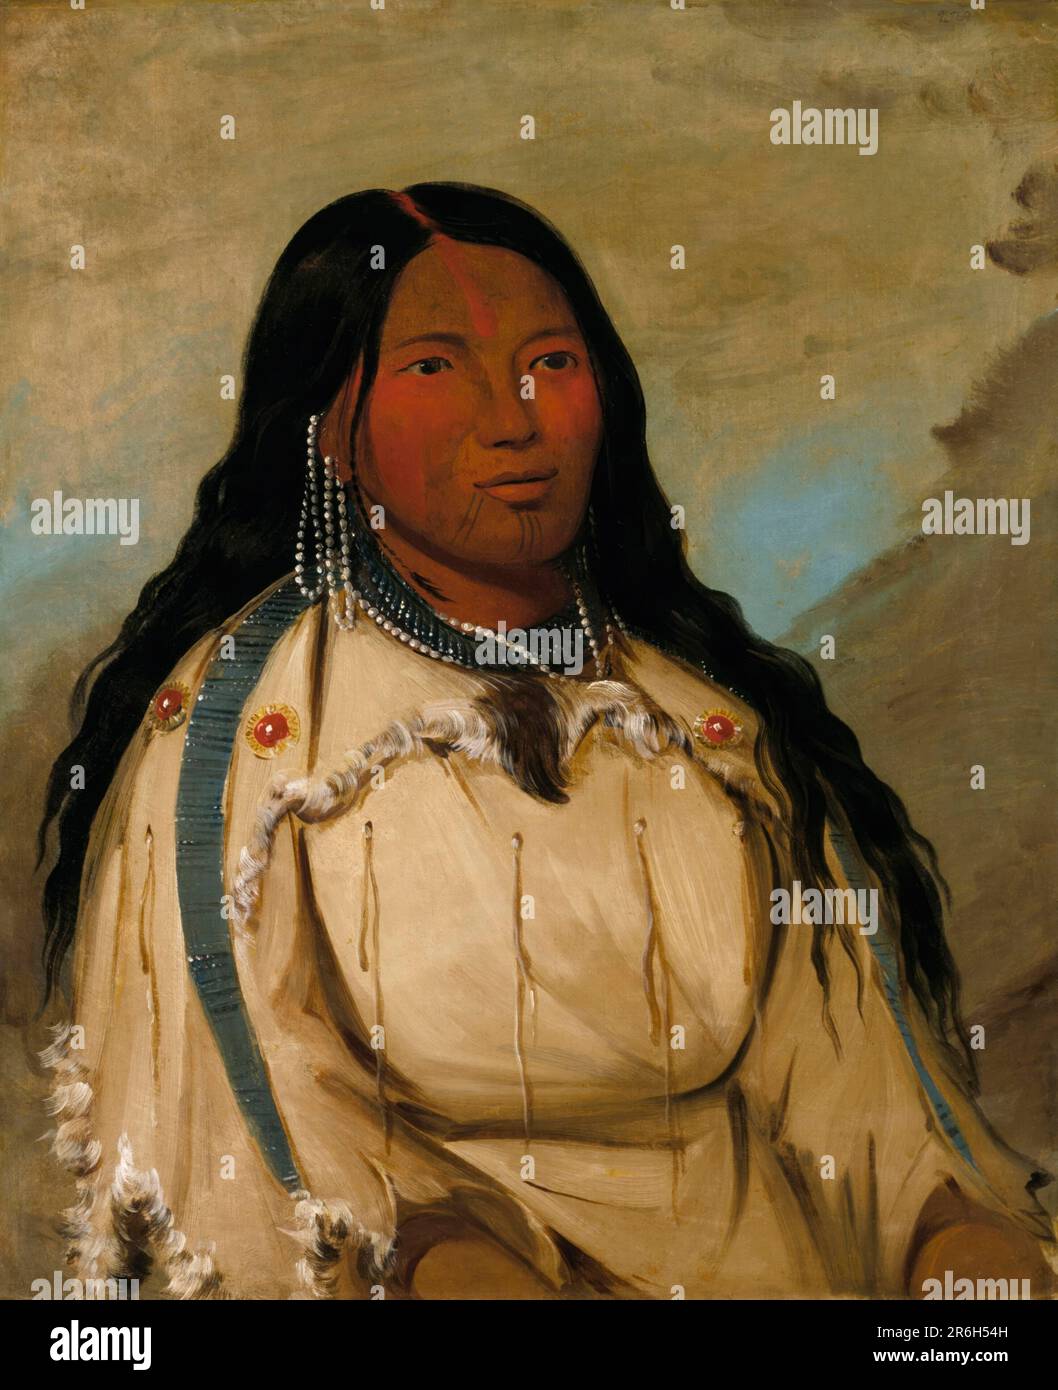 Tow-ée-ka-wet, a Cree Woman. oil on canvas. Date: 1832. Museum: Smithsonian American Art Museum. Stock Photo